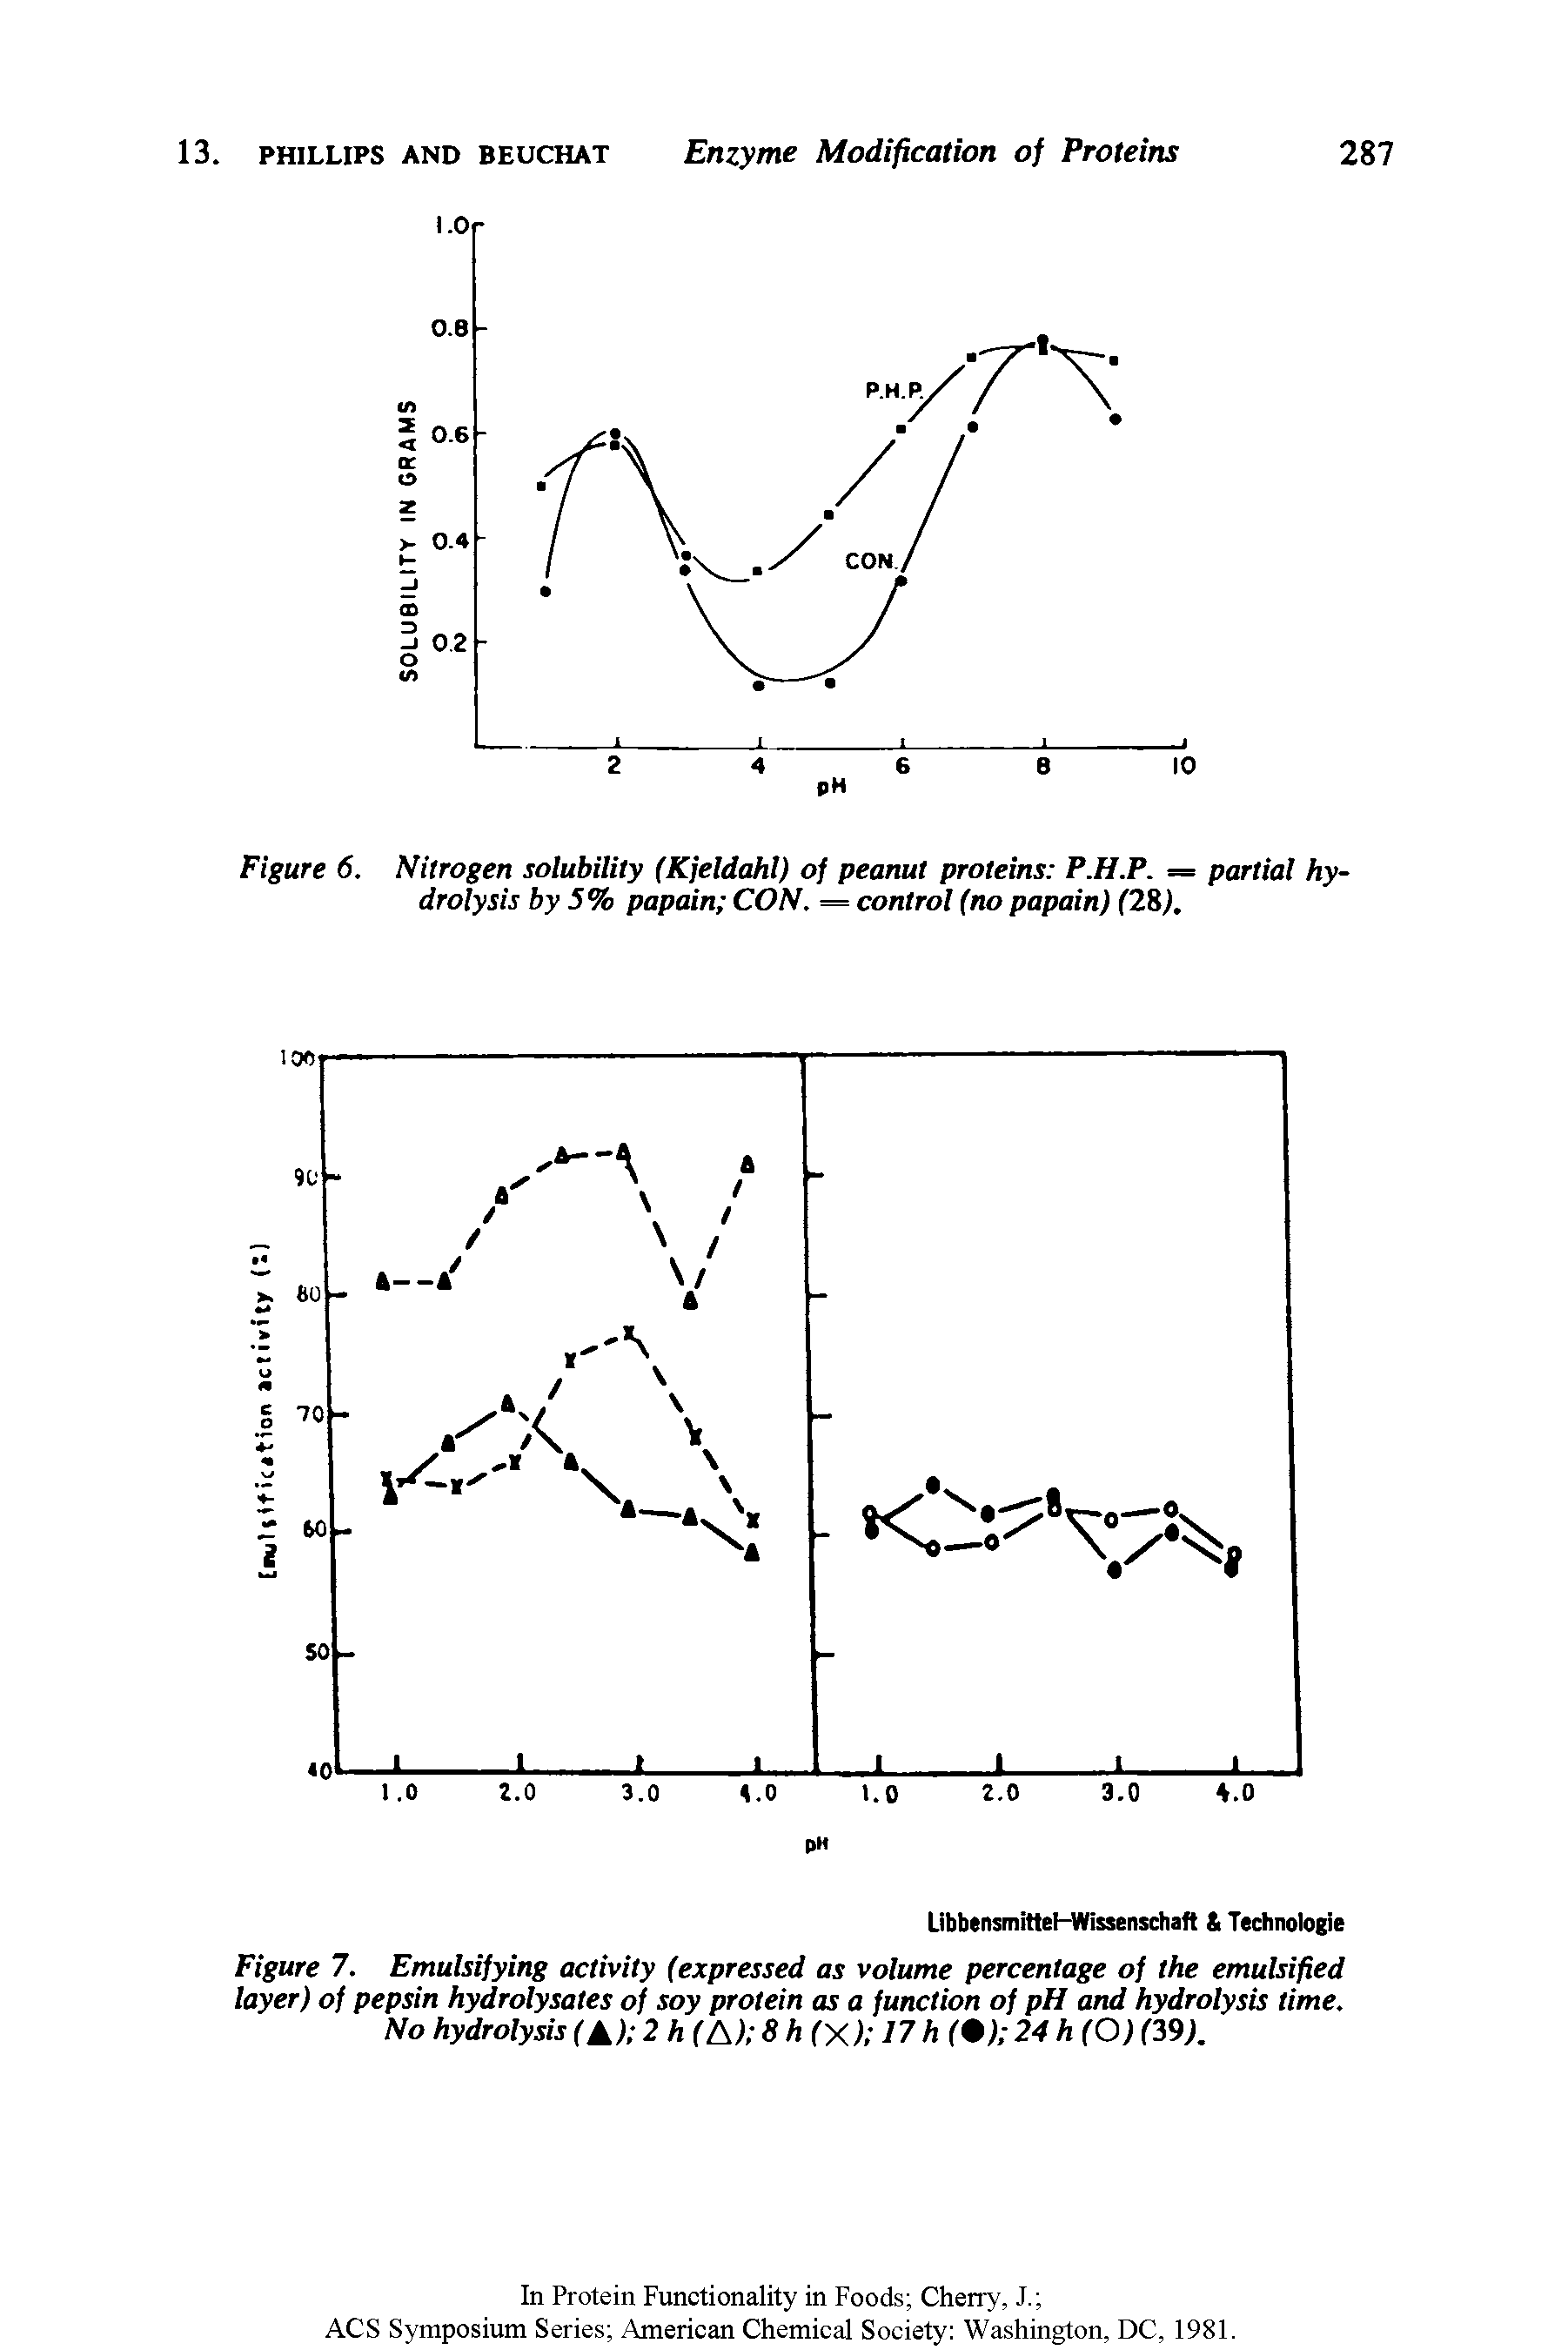 Figure 7. Emulsifying activity (expressed as volume percentage of the emulsified layer) of pepsin hydrolysates of soy protein as a function of pH and hydrolysis time. No hydrolysis (A) 2 h ( ) 8 h (X) 17 h ( ) 24h(O) (39).